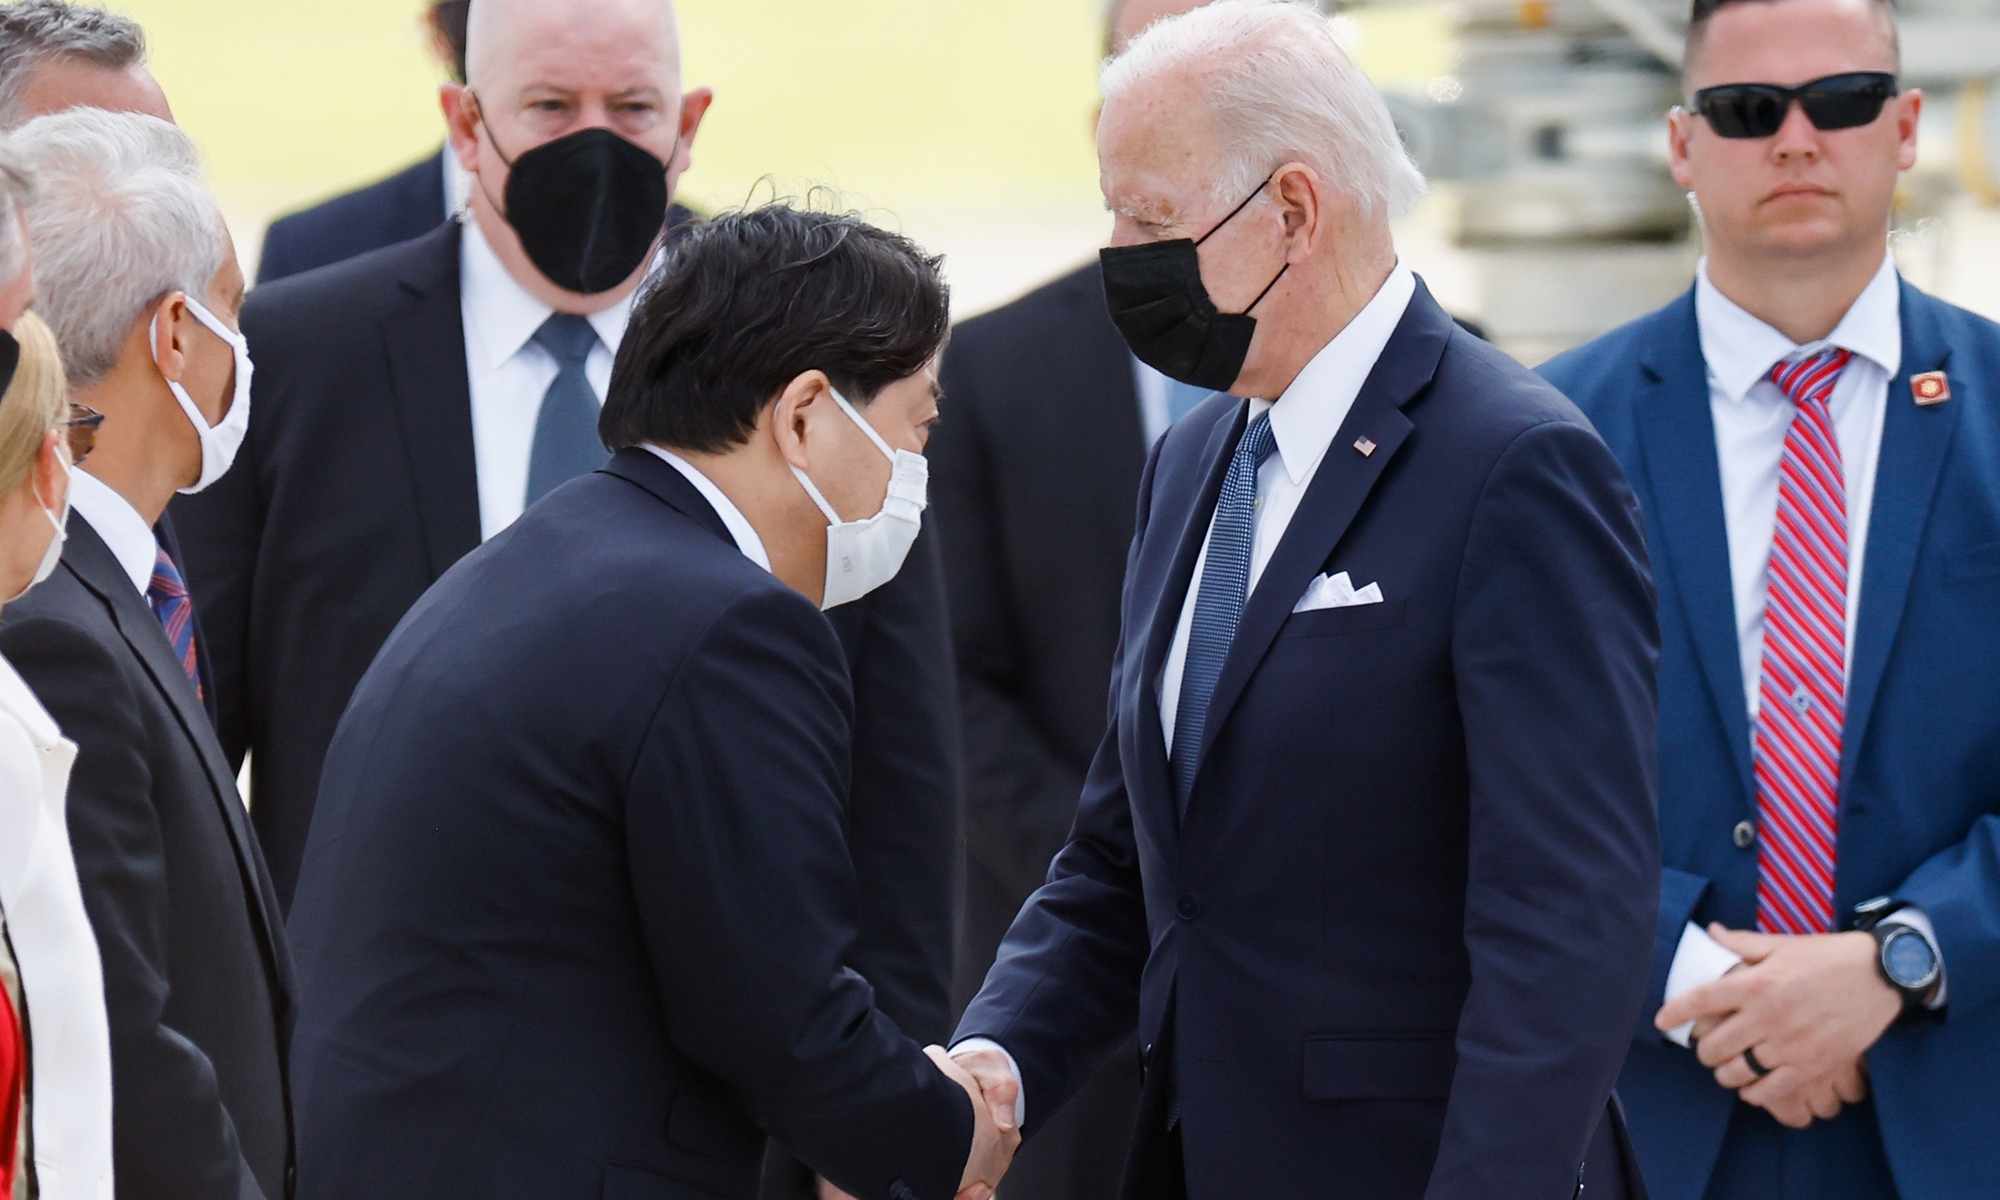 US President Joe Biden shakes hands with Japanese Foreign Minister Yoshimasa Hayashi upon his arrival at Yokota US Air Force Base in Fussa, on the outskirts of Tokyo, Japan on May 22, 2022. Photo: VCG